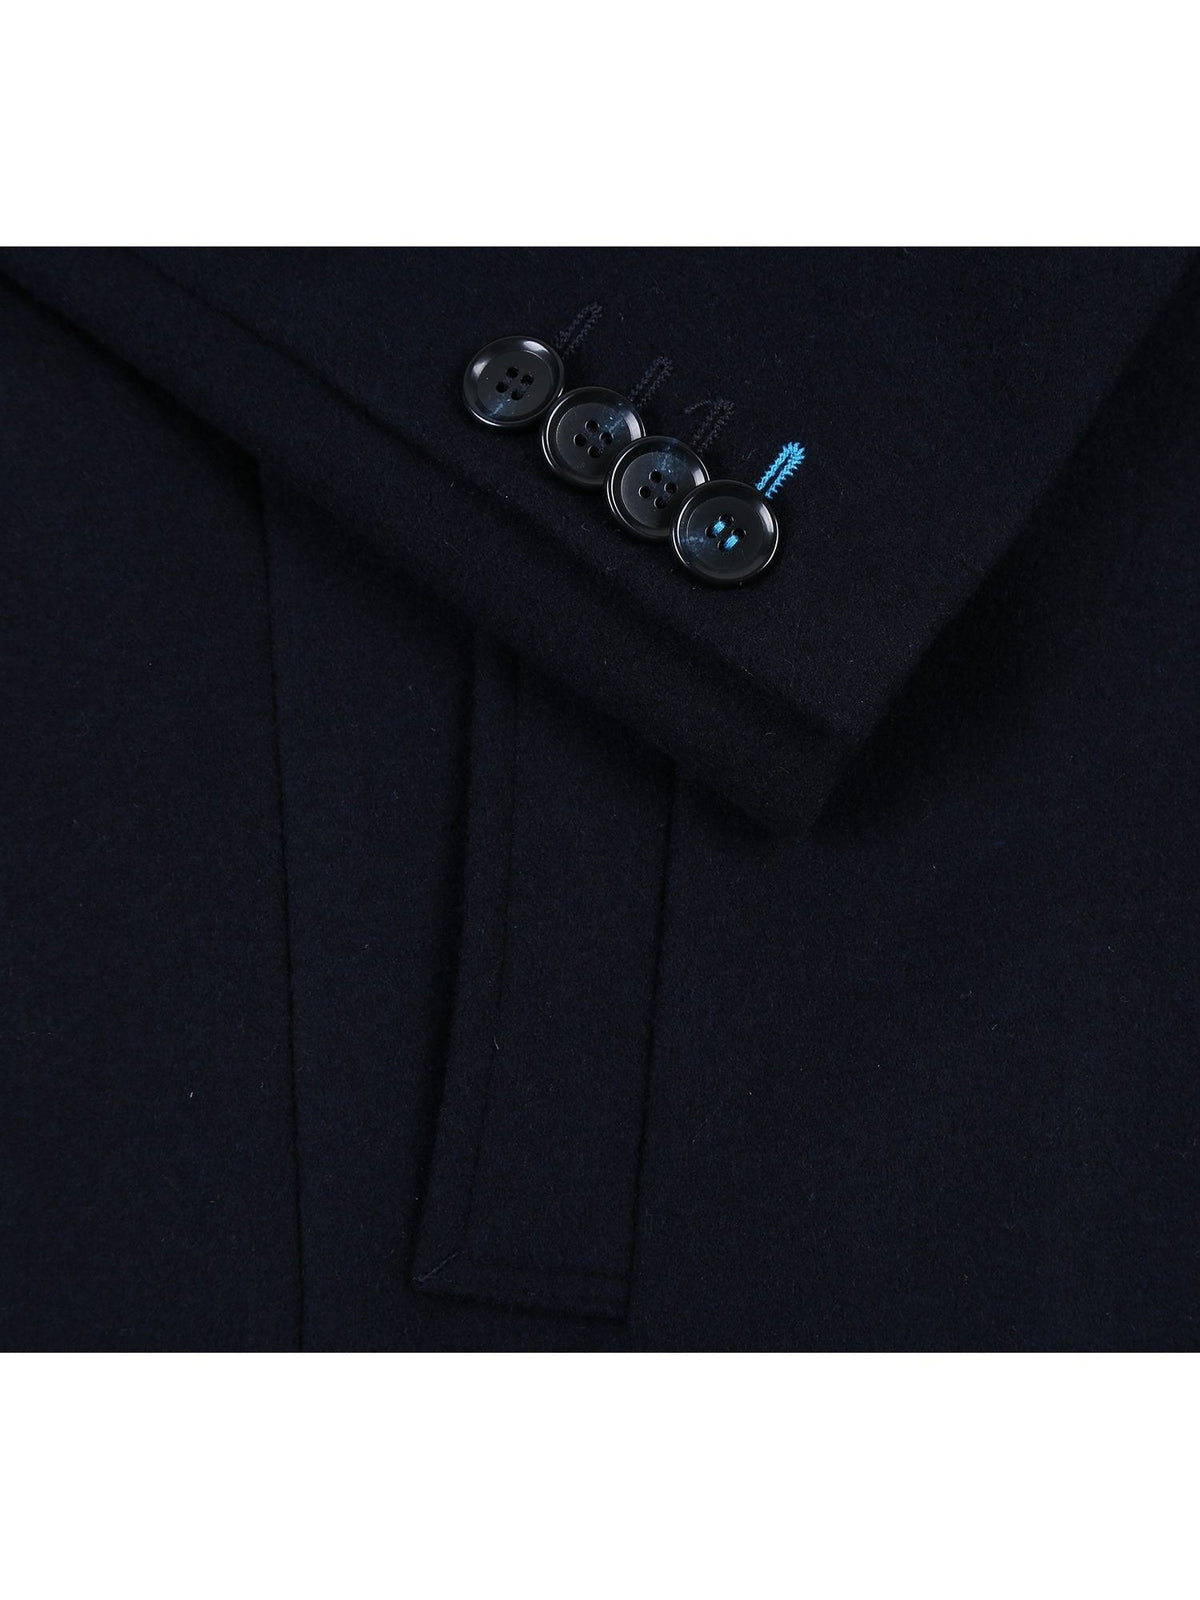 English Laundry Wool Blend Breasted Navy Top Coat